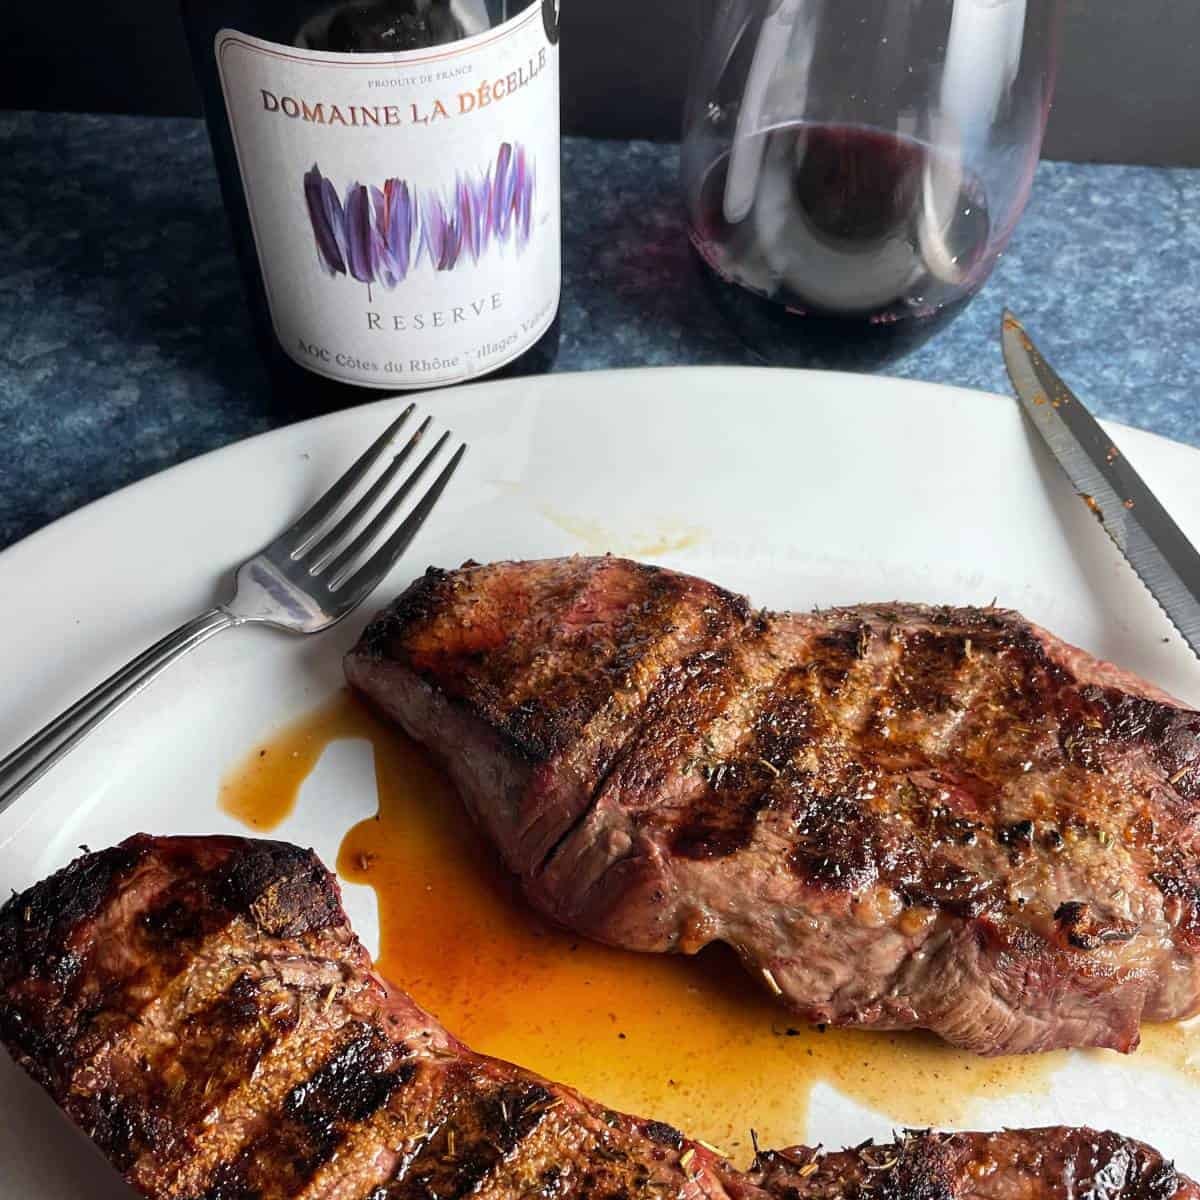 Grilled sirloin steak on a white platter served with a Cotes du Rhone red wine.